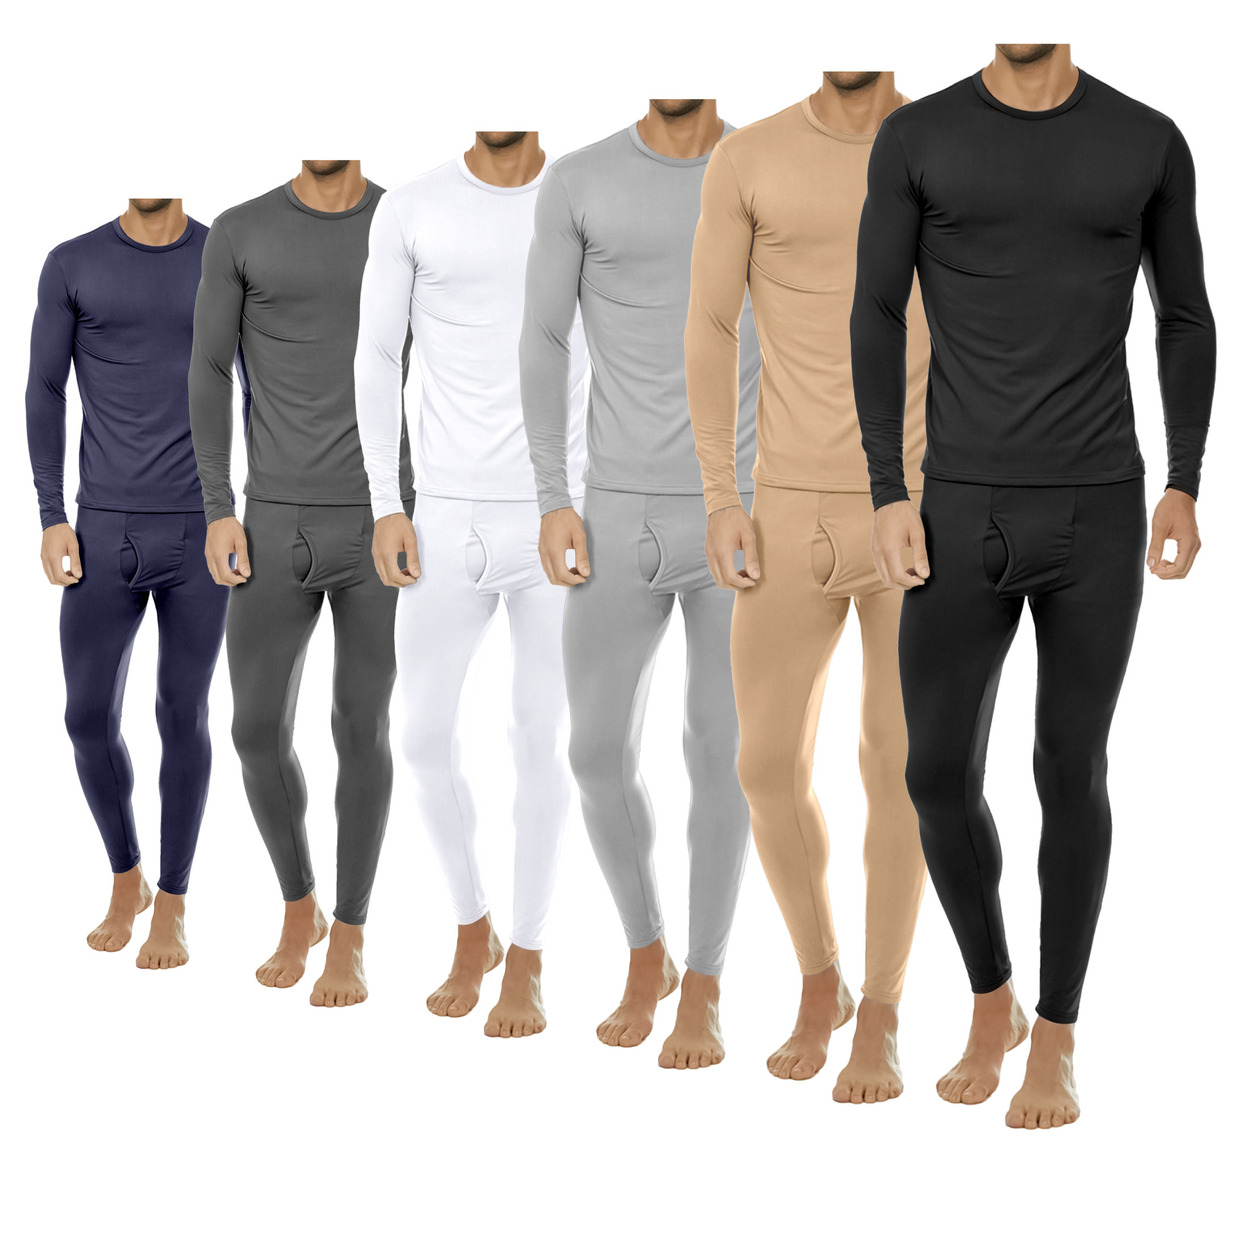 2-Pieces: Men's Winter Warm Fleece Lined Thermal Underwear Set For Cold Weather - Navy, Xx-large